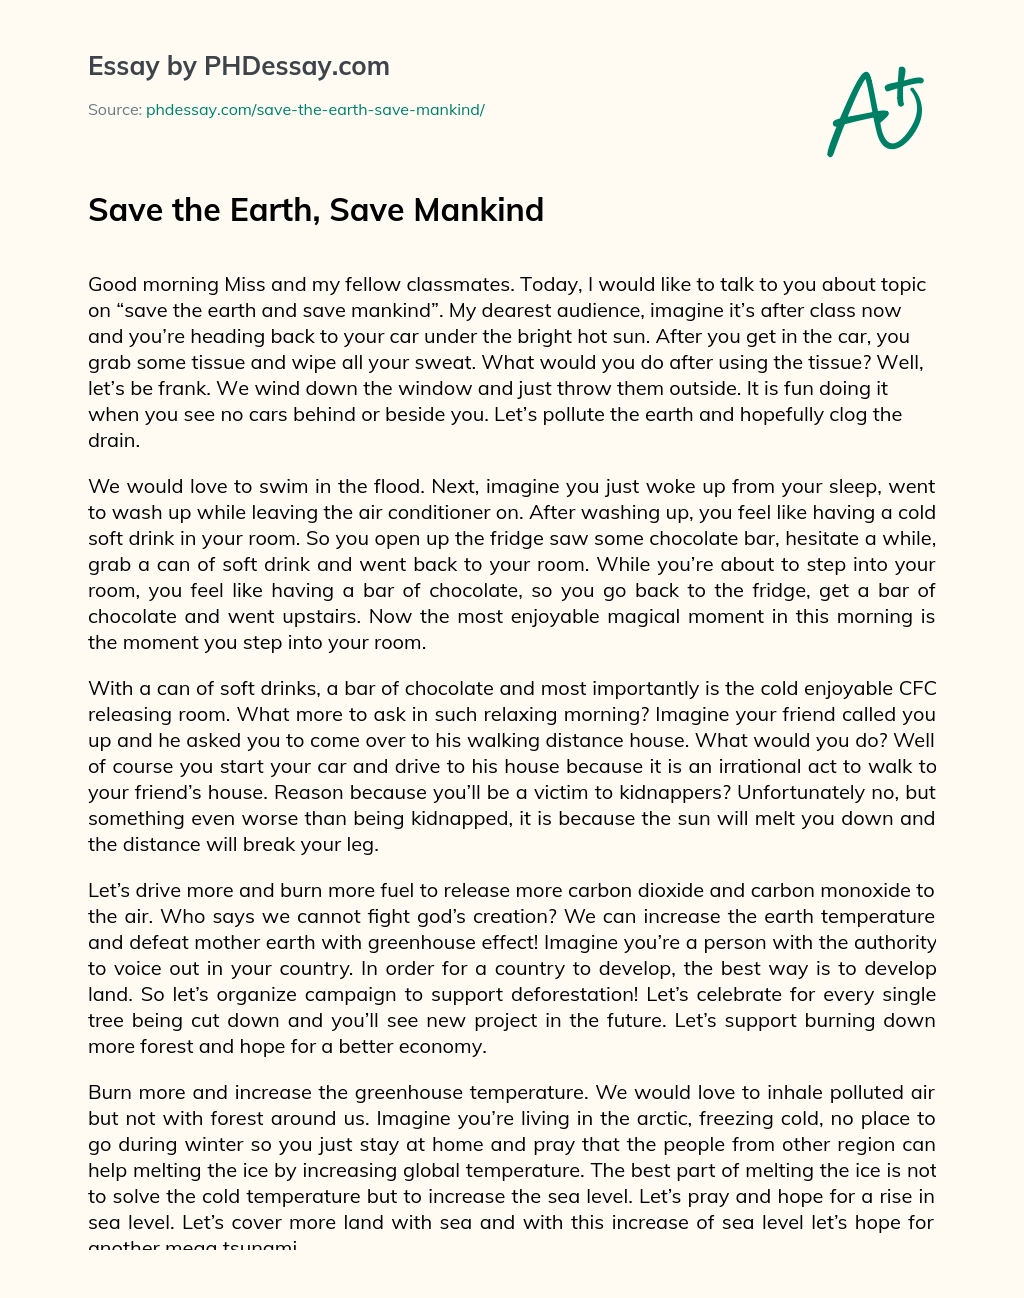 Save the Earth, Save Mankind essay